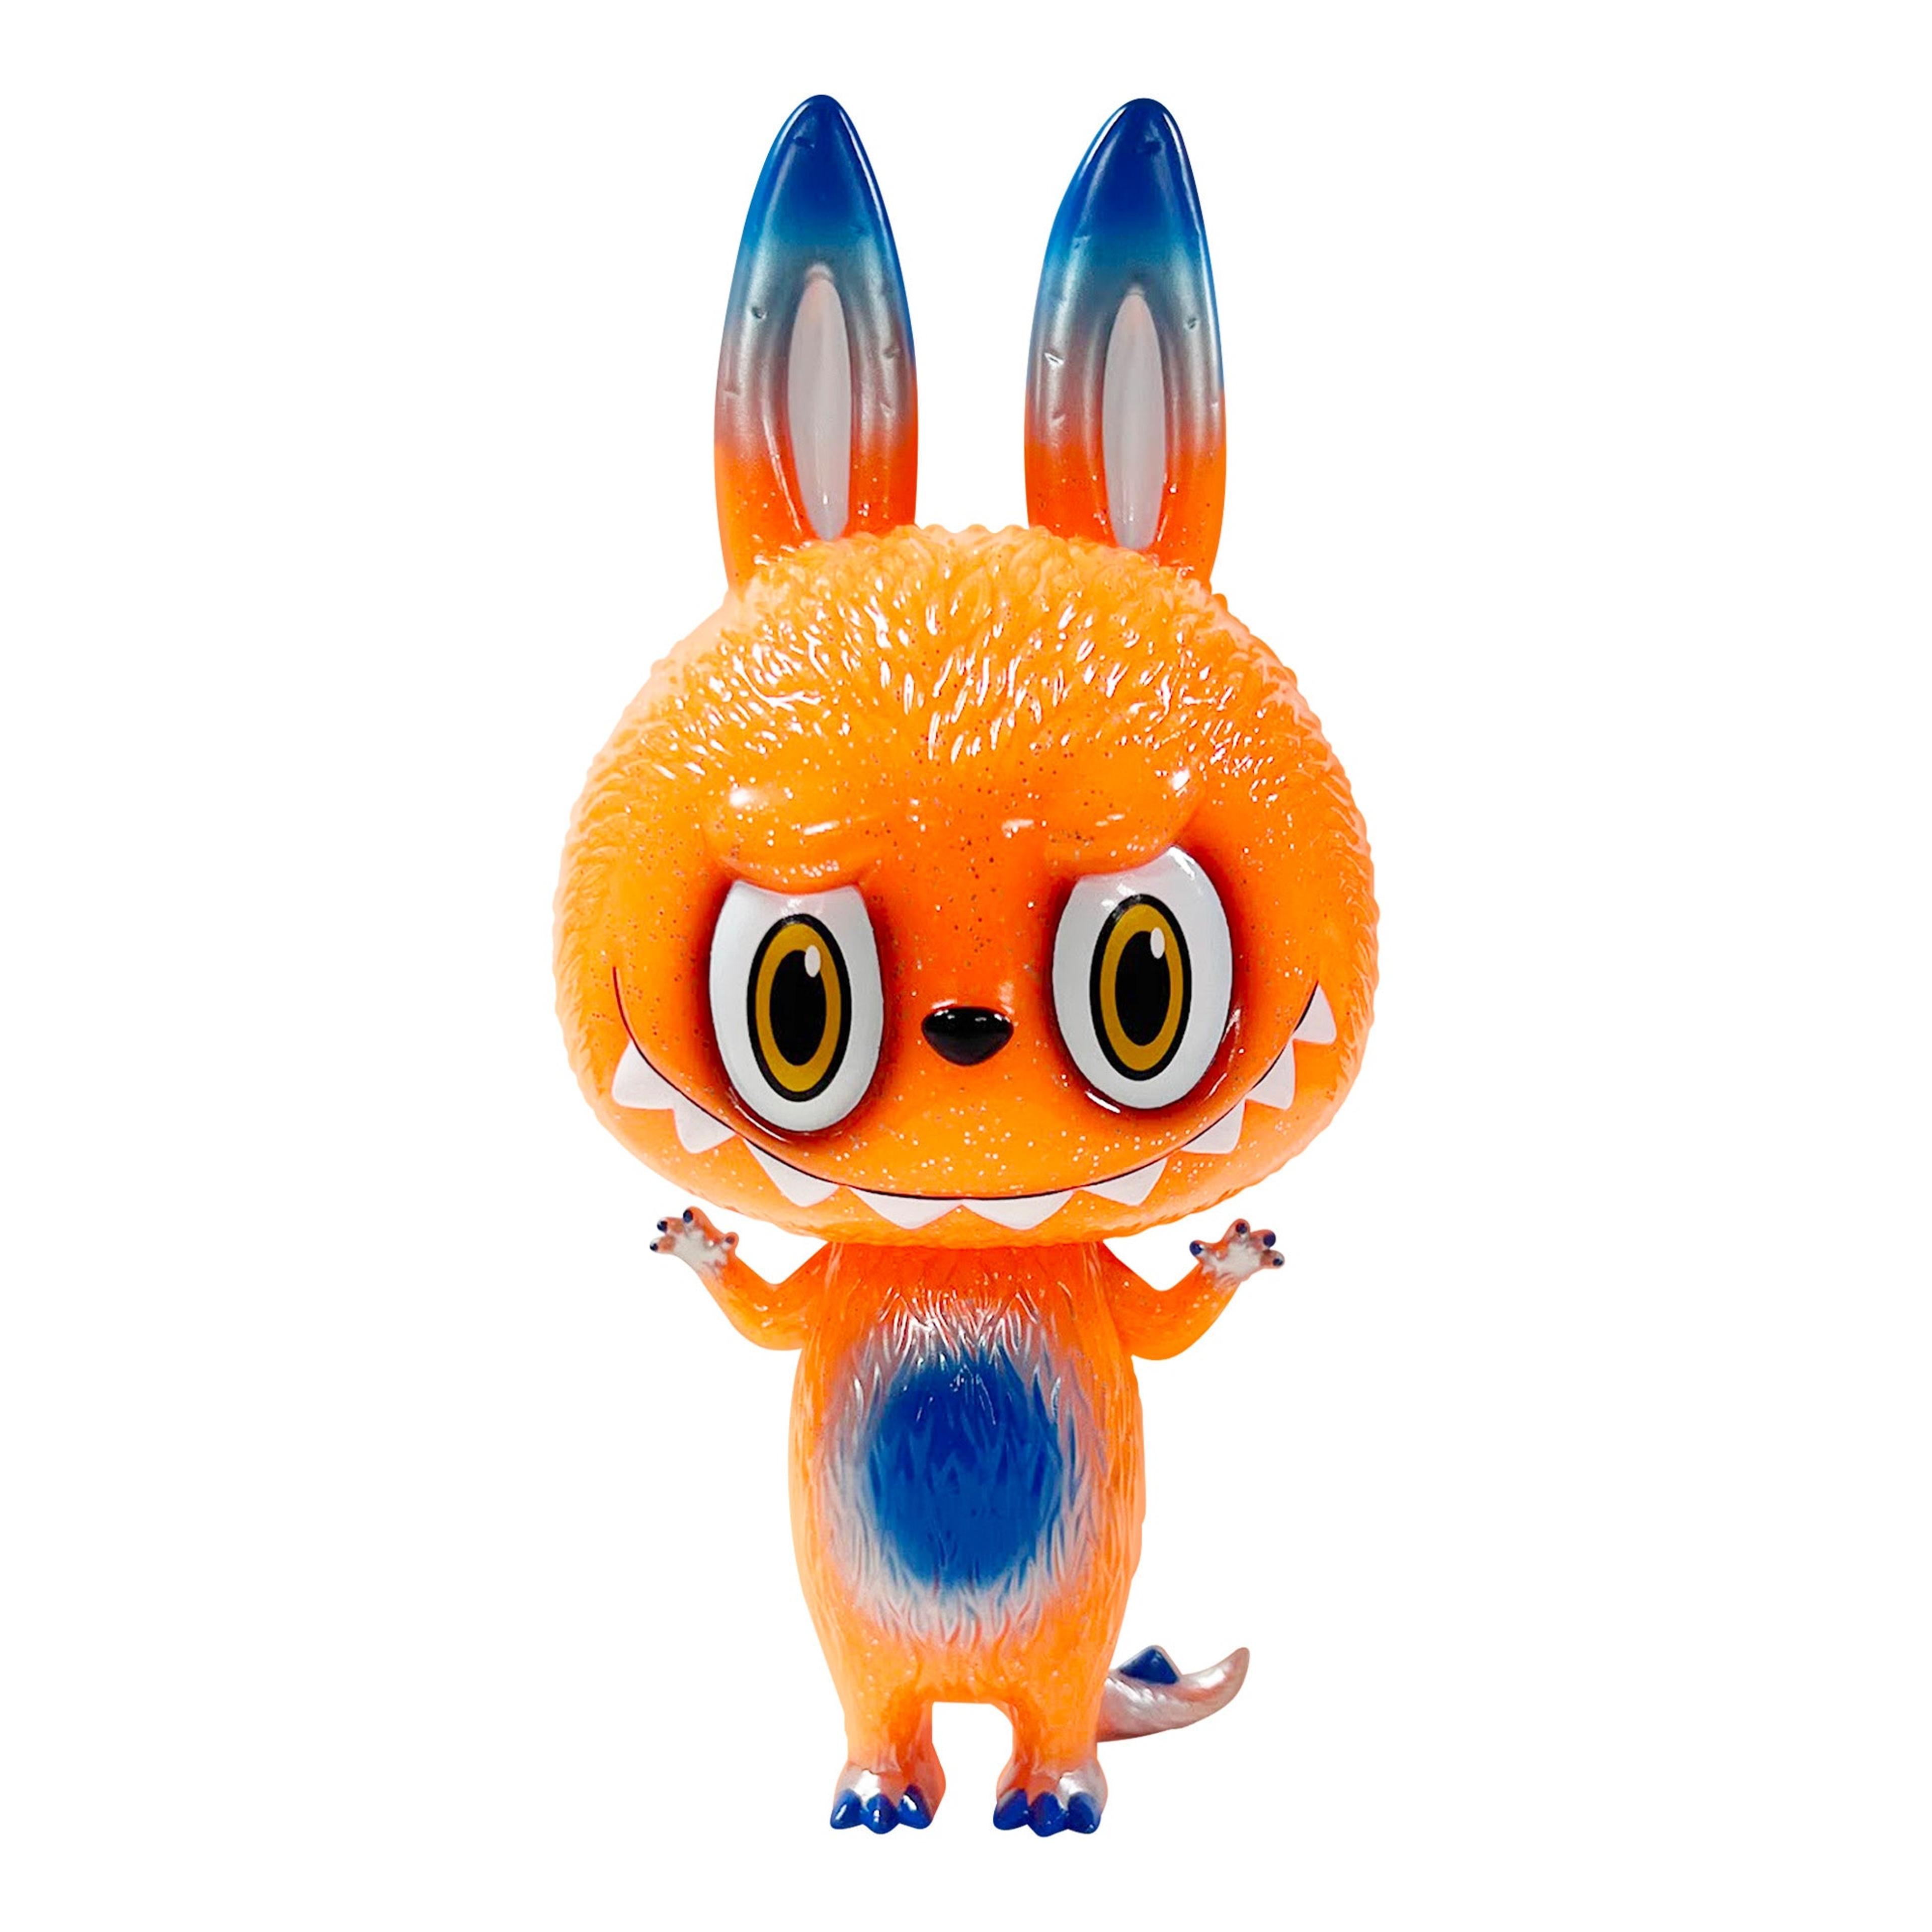 Alternate View 2 of How2Work x Kasing Lung - Zimomo Toy Tokyo Exclusive